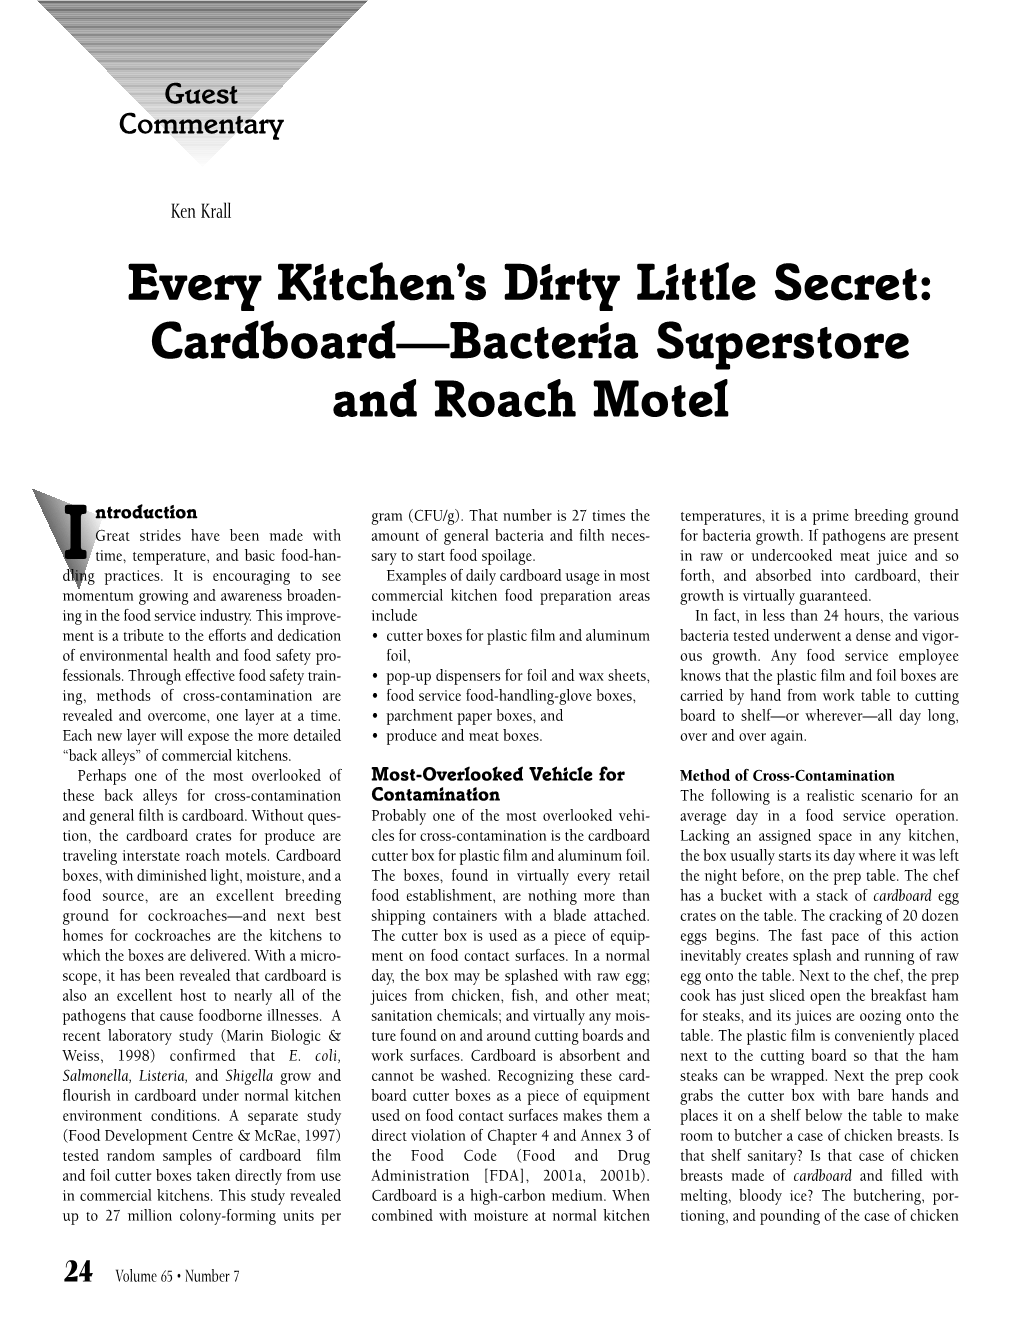 Every Kitchen's Dirty Little Secret: Cardboard—Bacteria Superstore